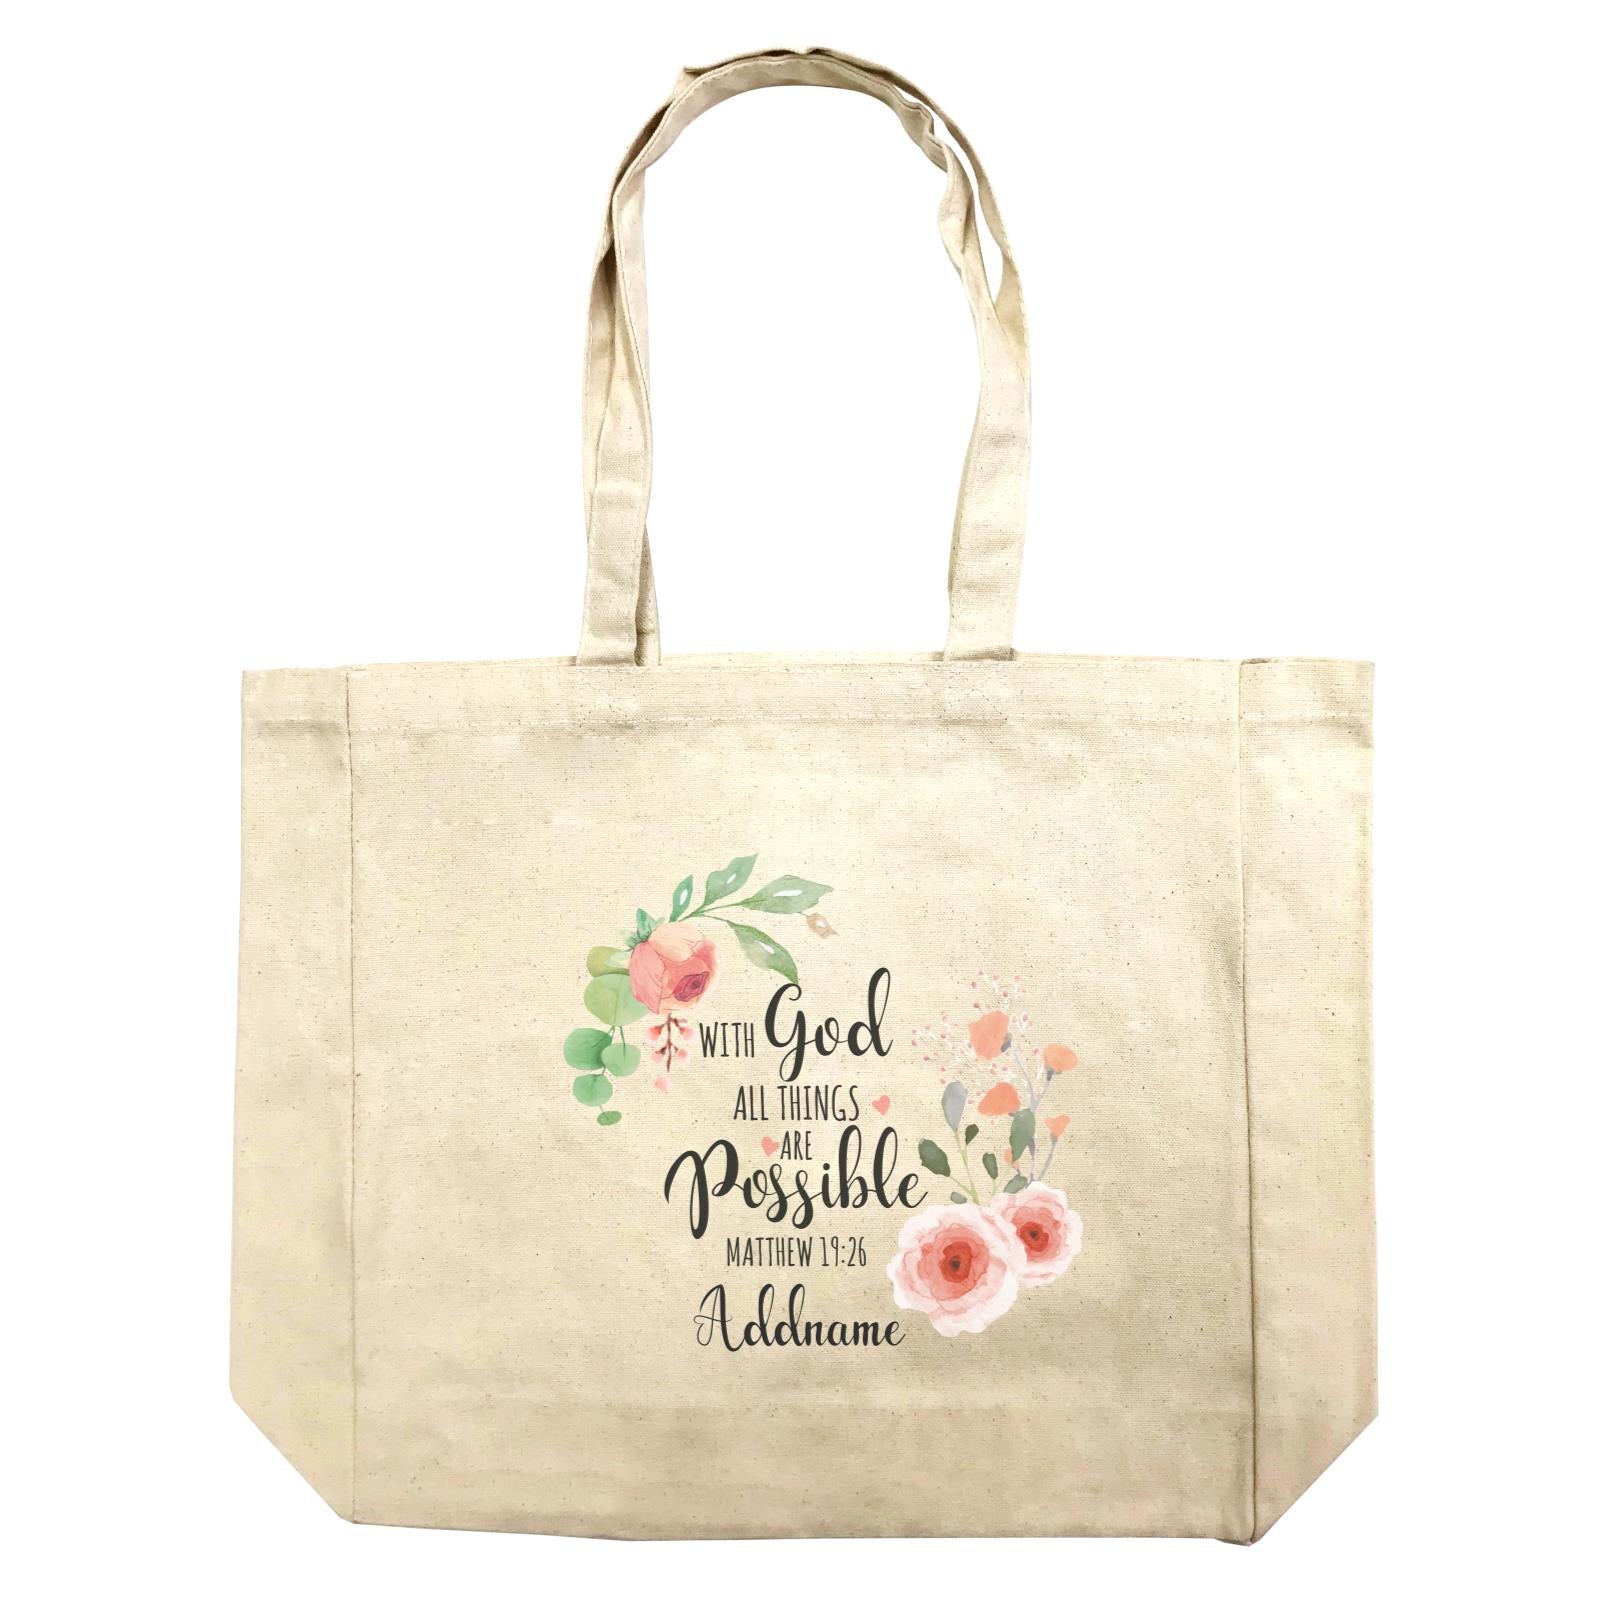 Gods Gift With God All Things Are Possible Matthew 19.26 Addname Shopping Bag